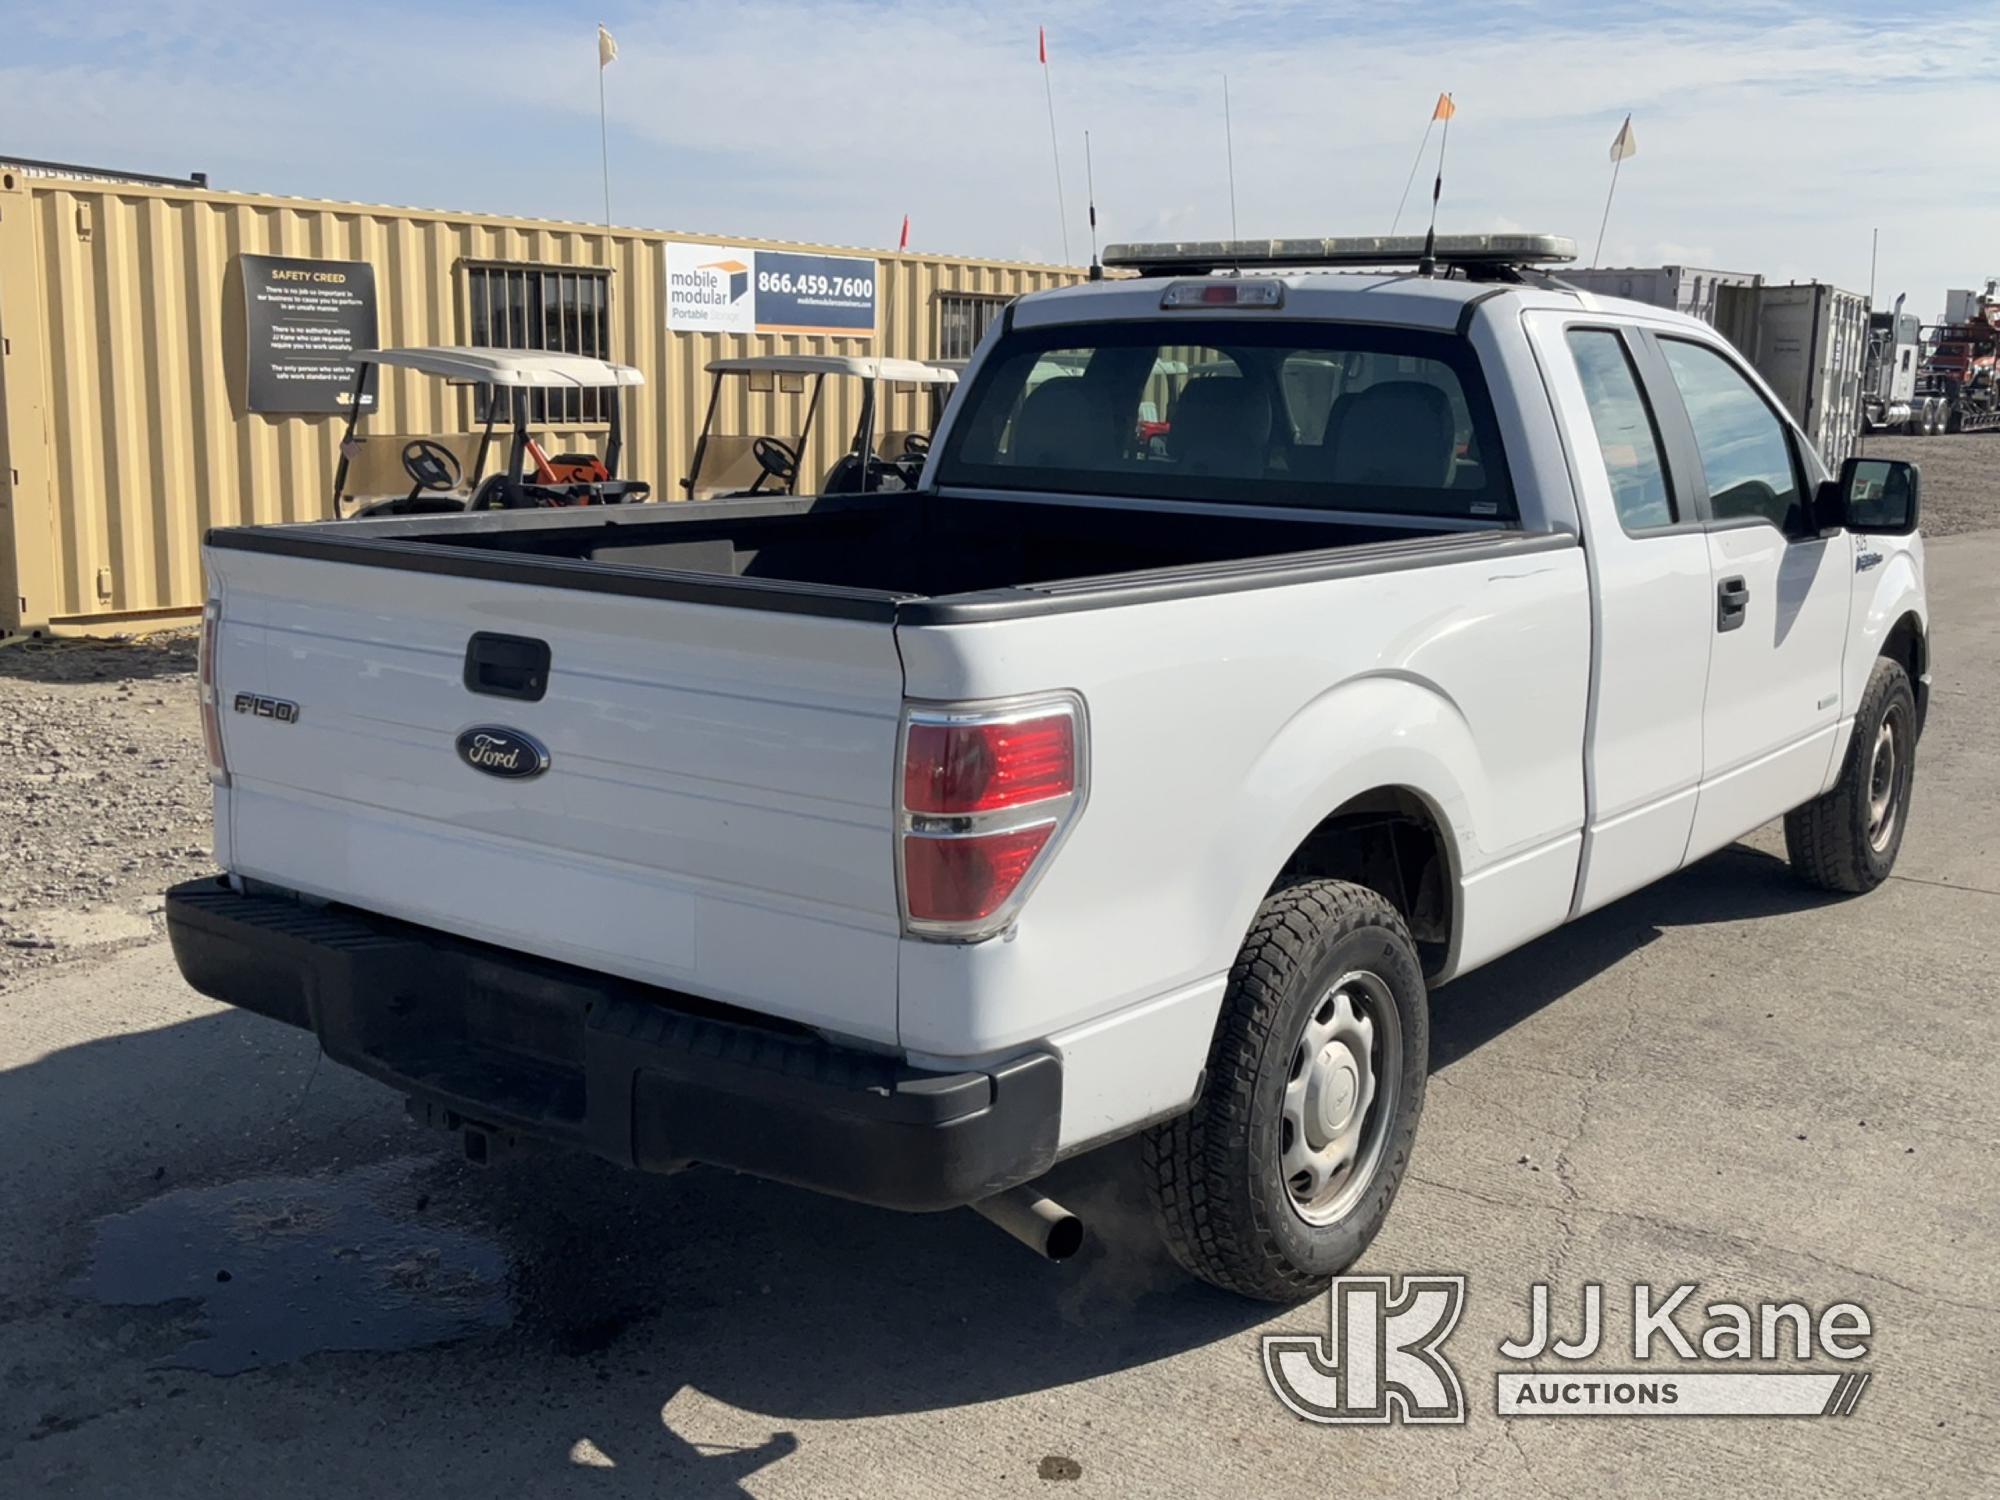 (Dixon, CA) 2014 Ford F150 Extended-Cab Pickup Truck Runs & Moves) (Paint Damage On Passenger Bed Si